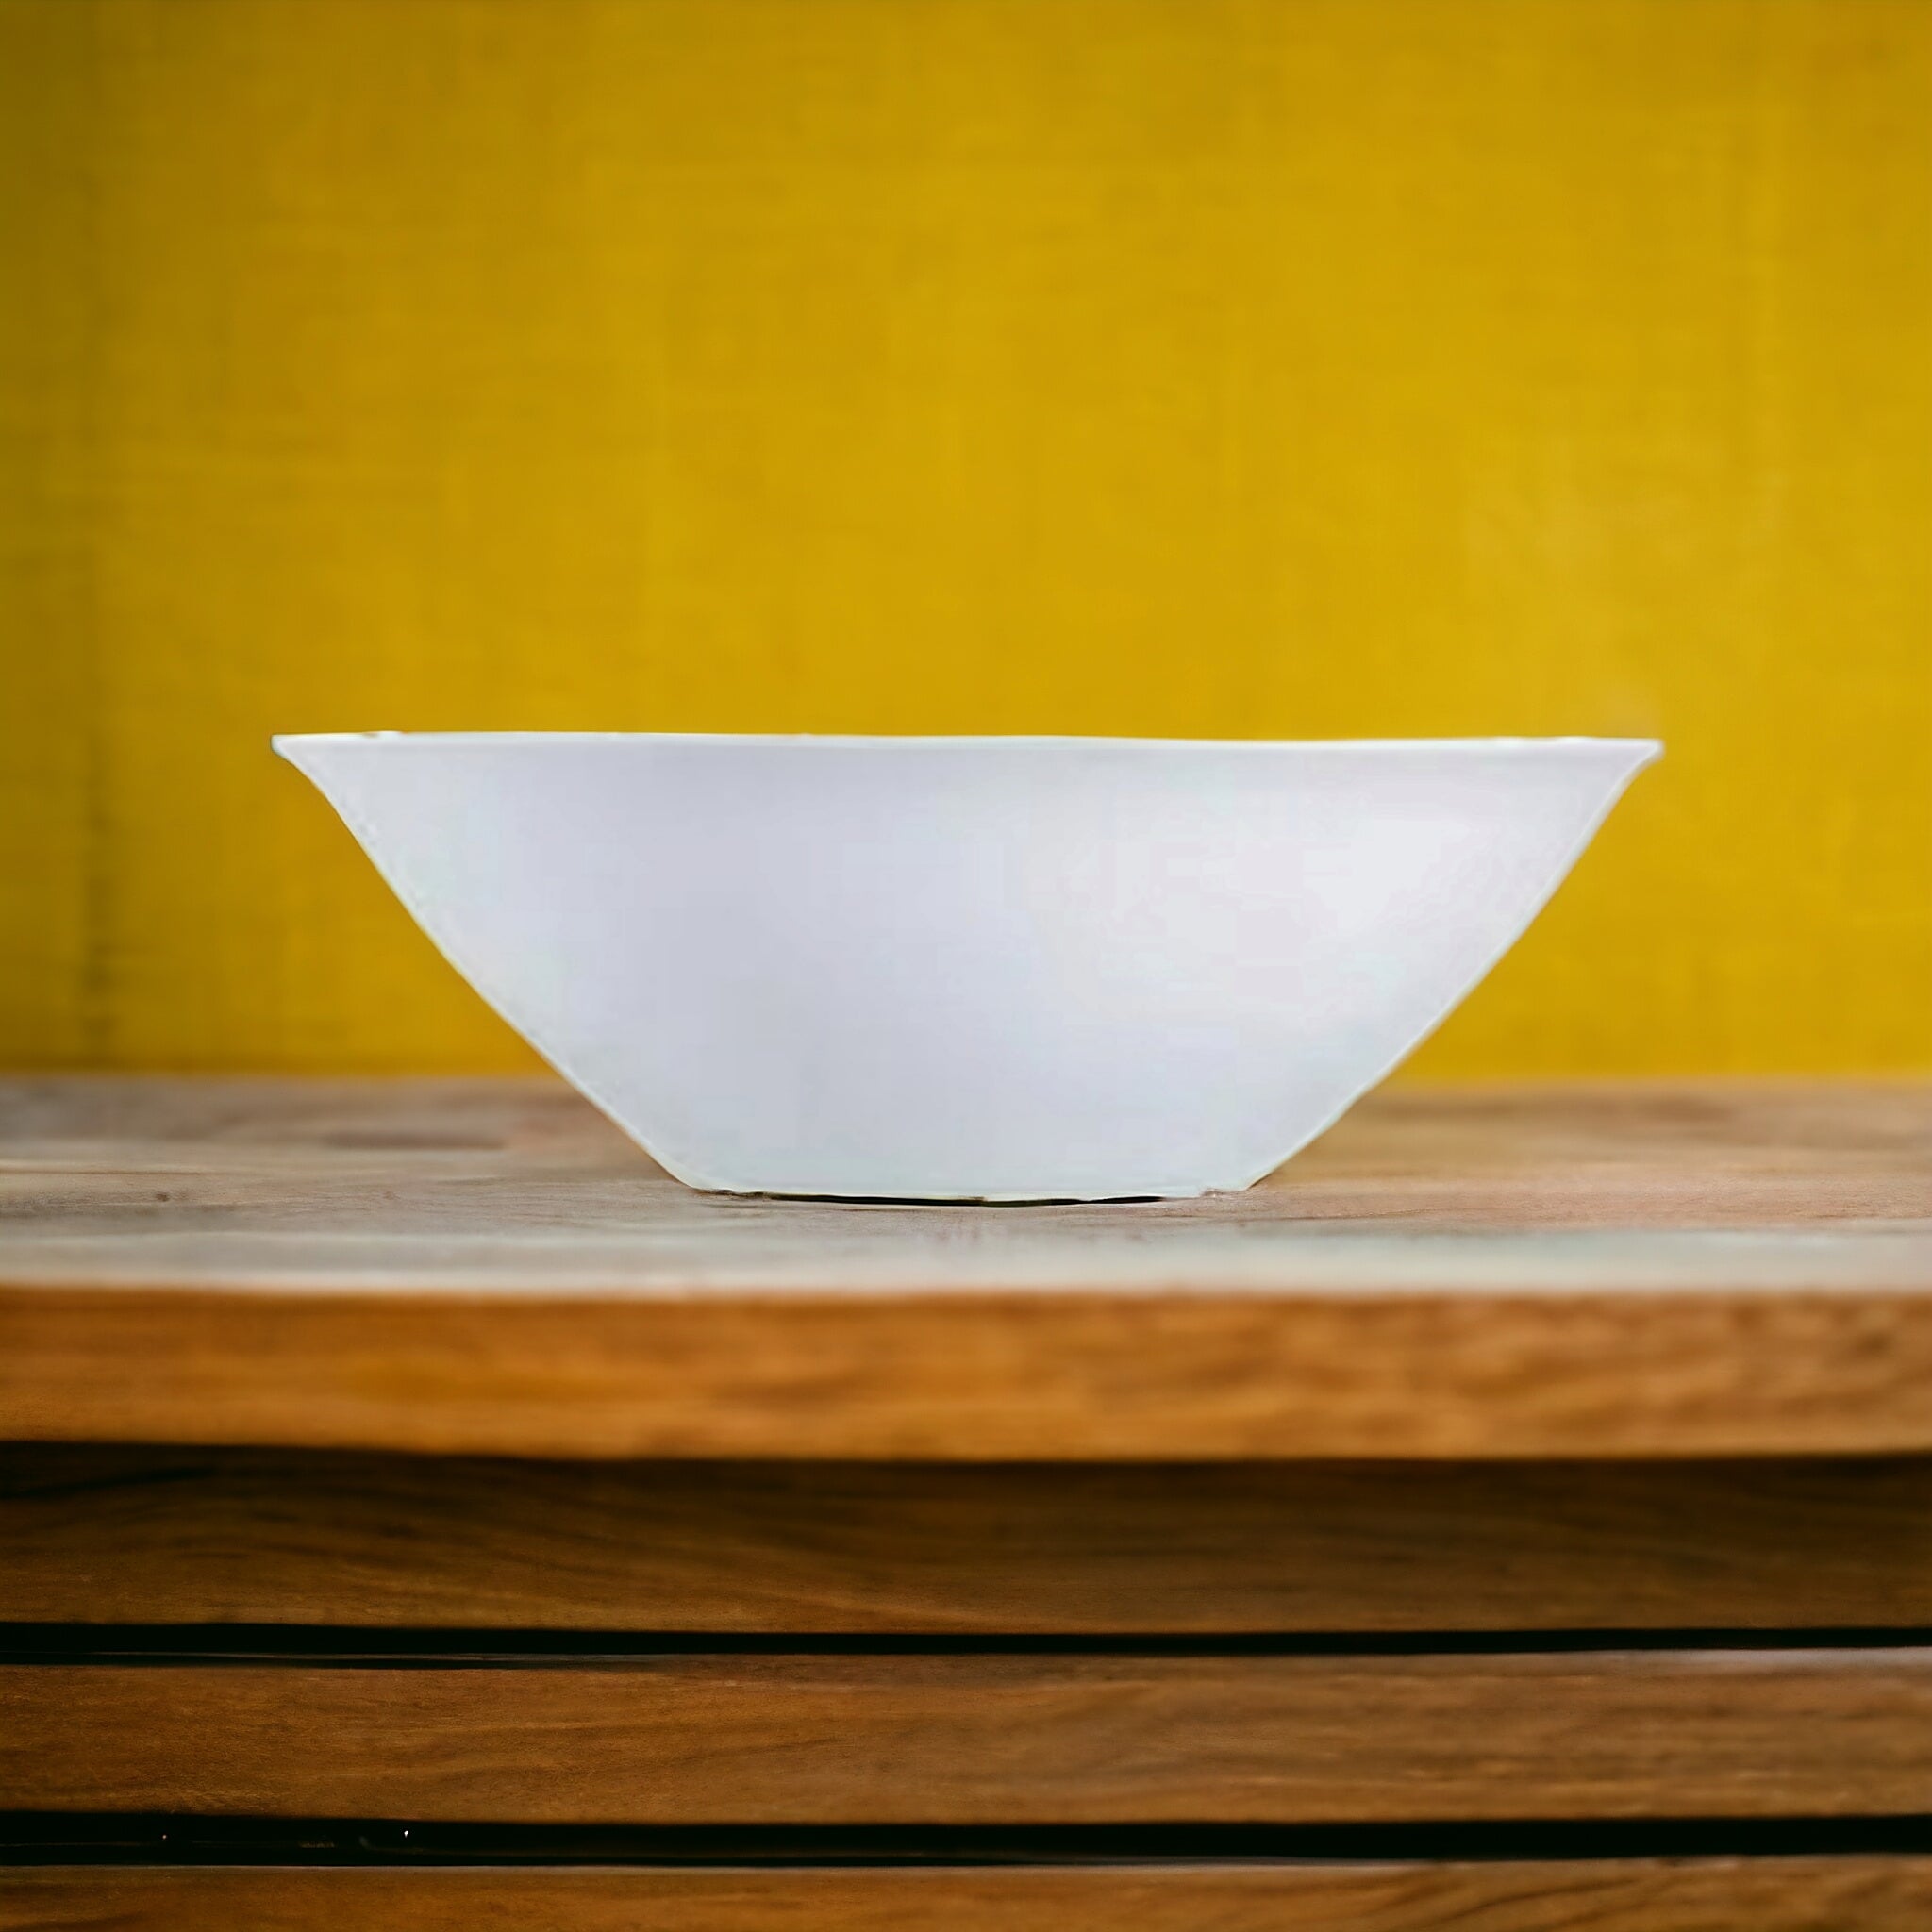 Totally Home Pure White Salad Bowl 7Inch